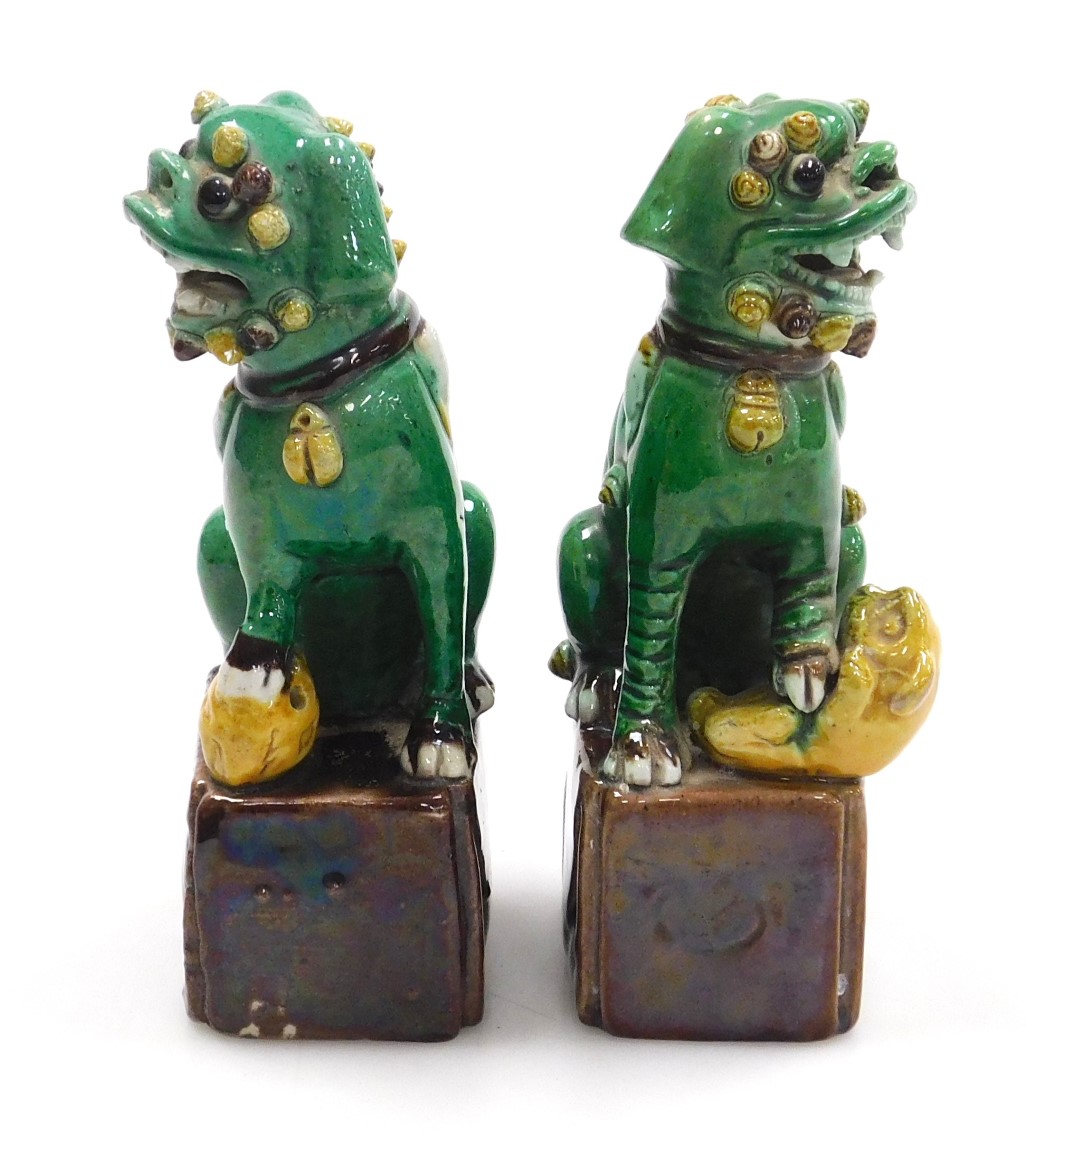 A pair of 19thC Qing dynasty porcelain Sancai style Foo dogs, with a green and yellow glaze, modelle - Image 2 of 5